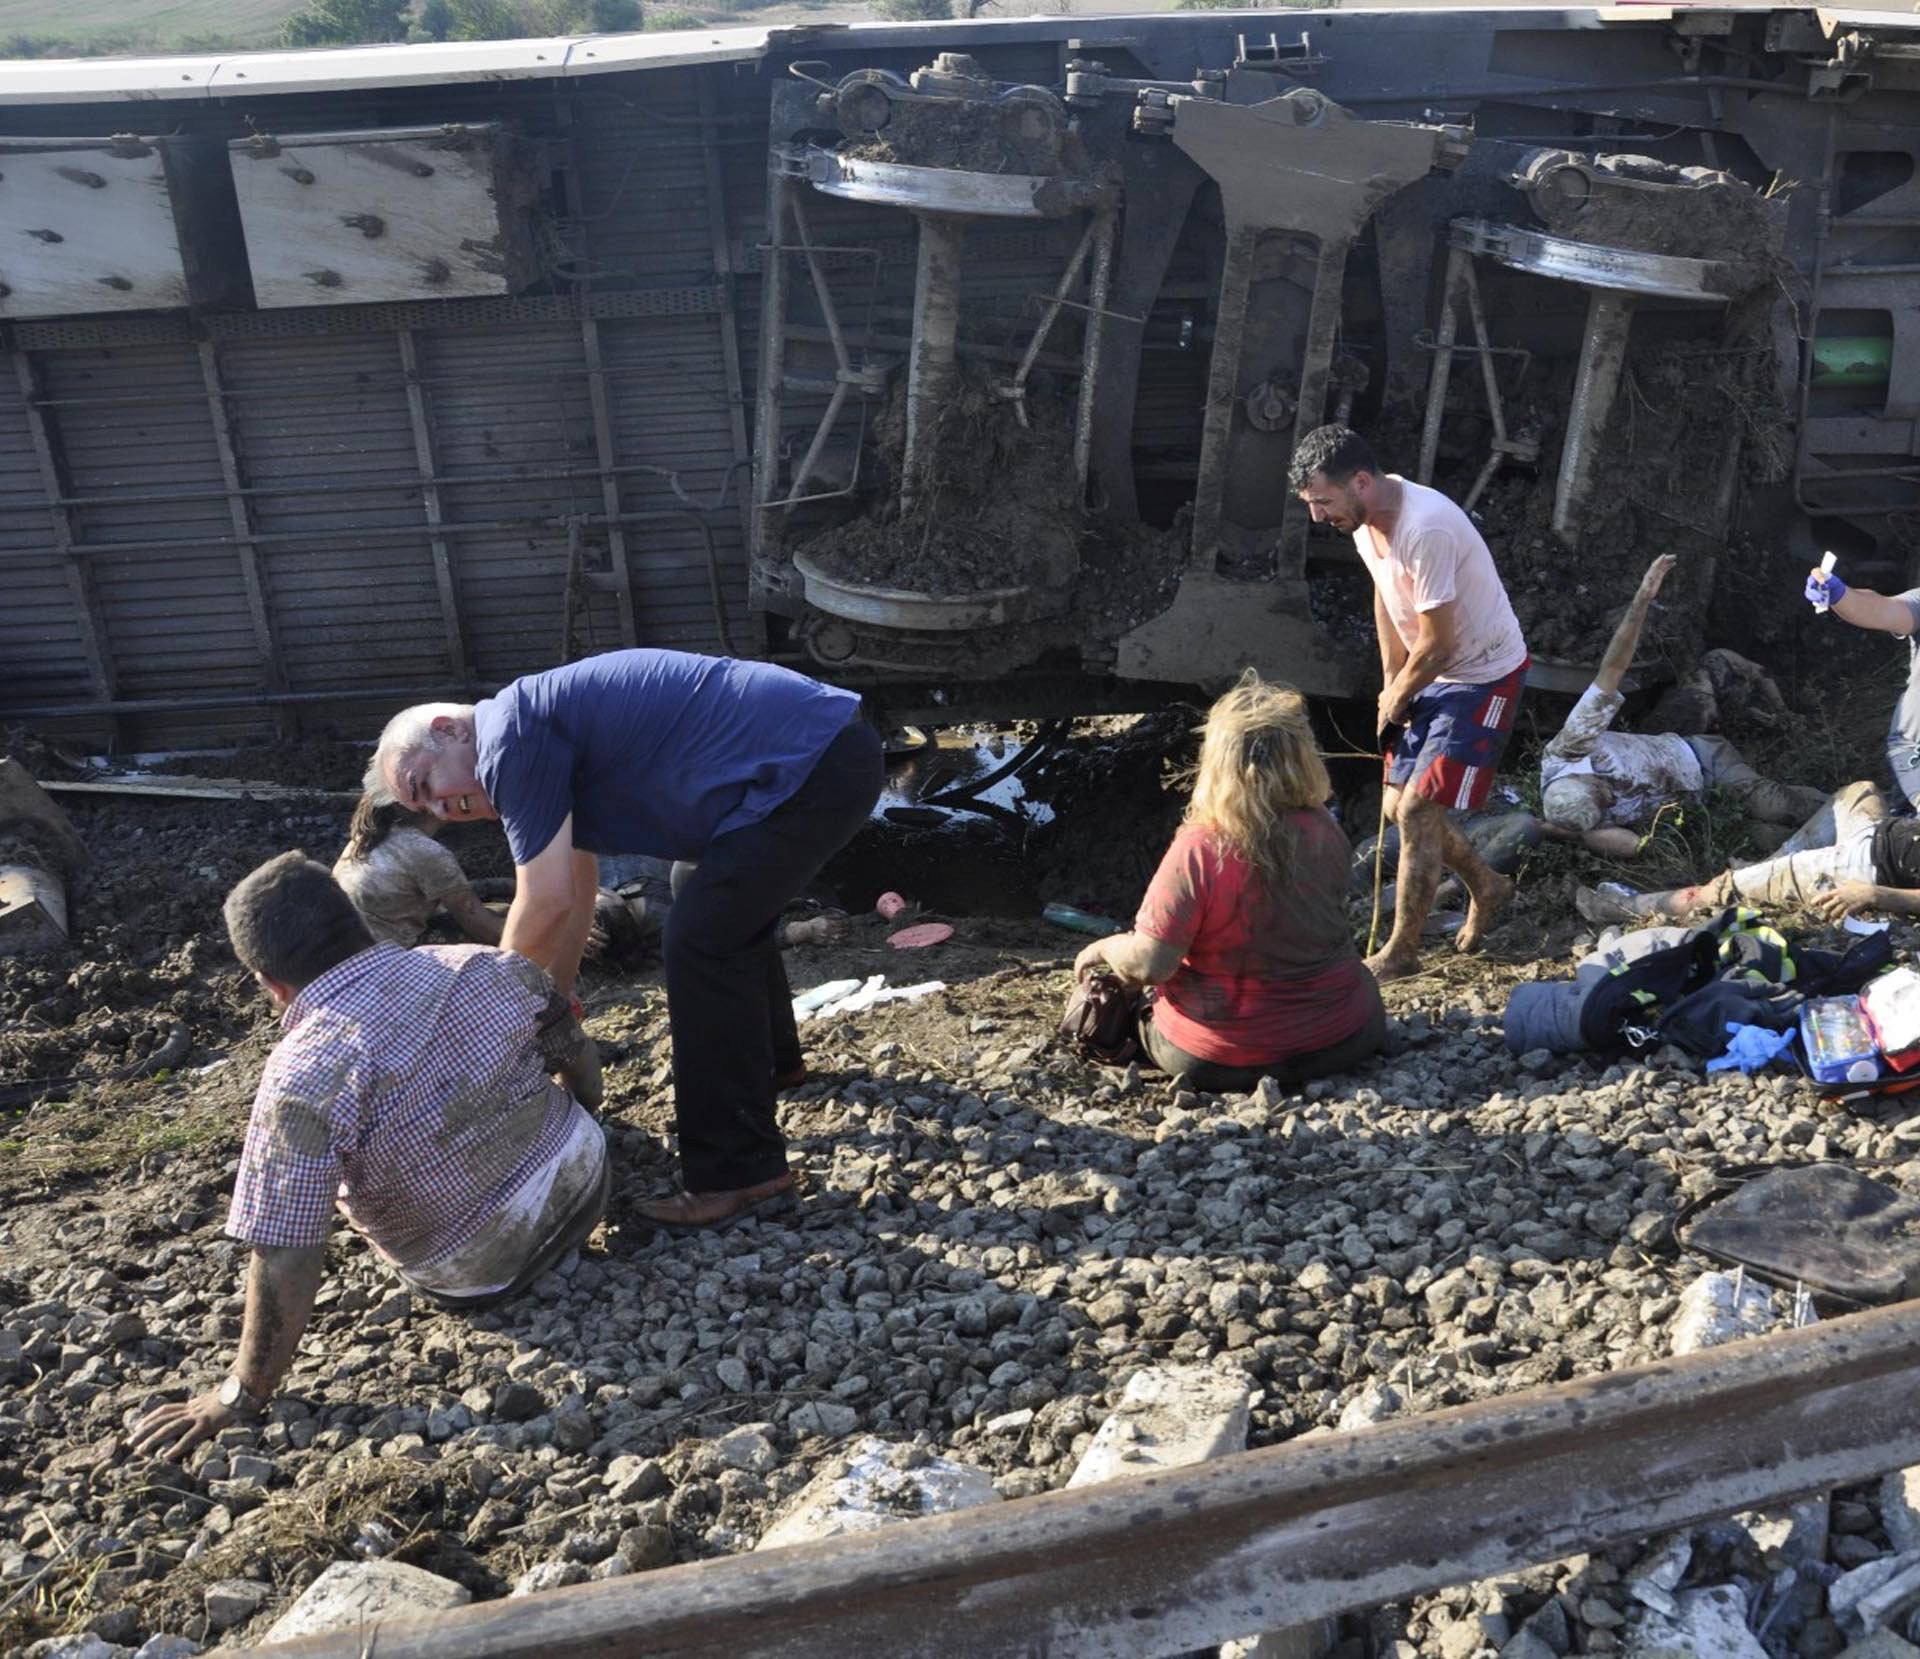 People receive help from medical personnel after a train came off the rails due to heavy rain and a landslide on to the tracks near Corlu in Tekirdag province